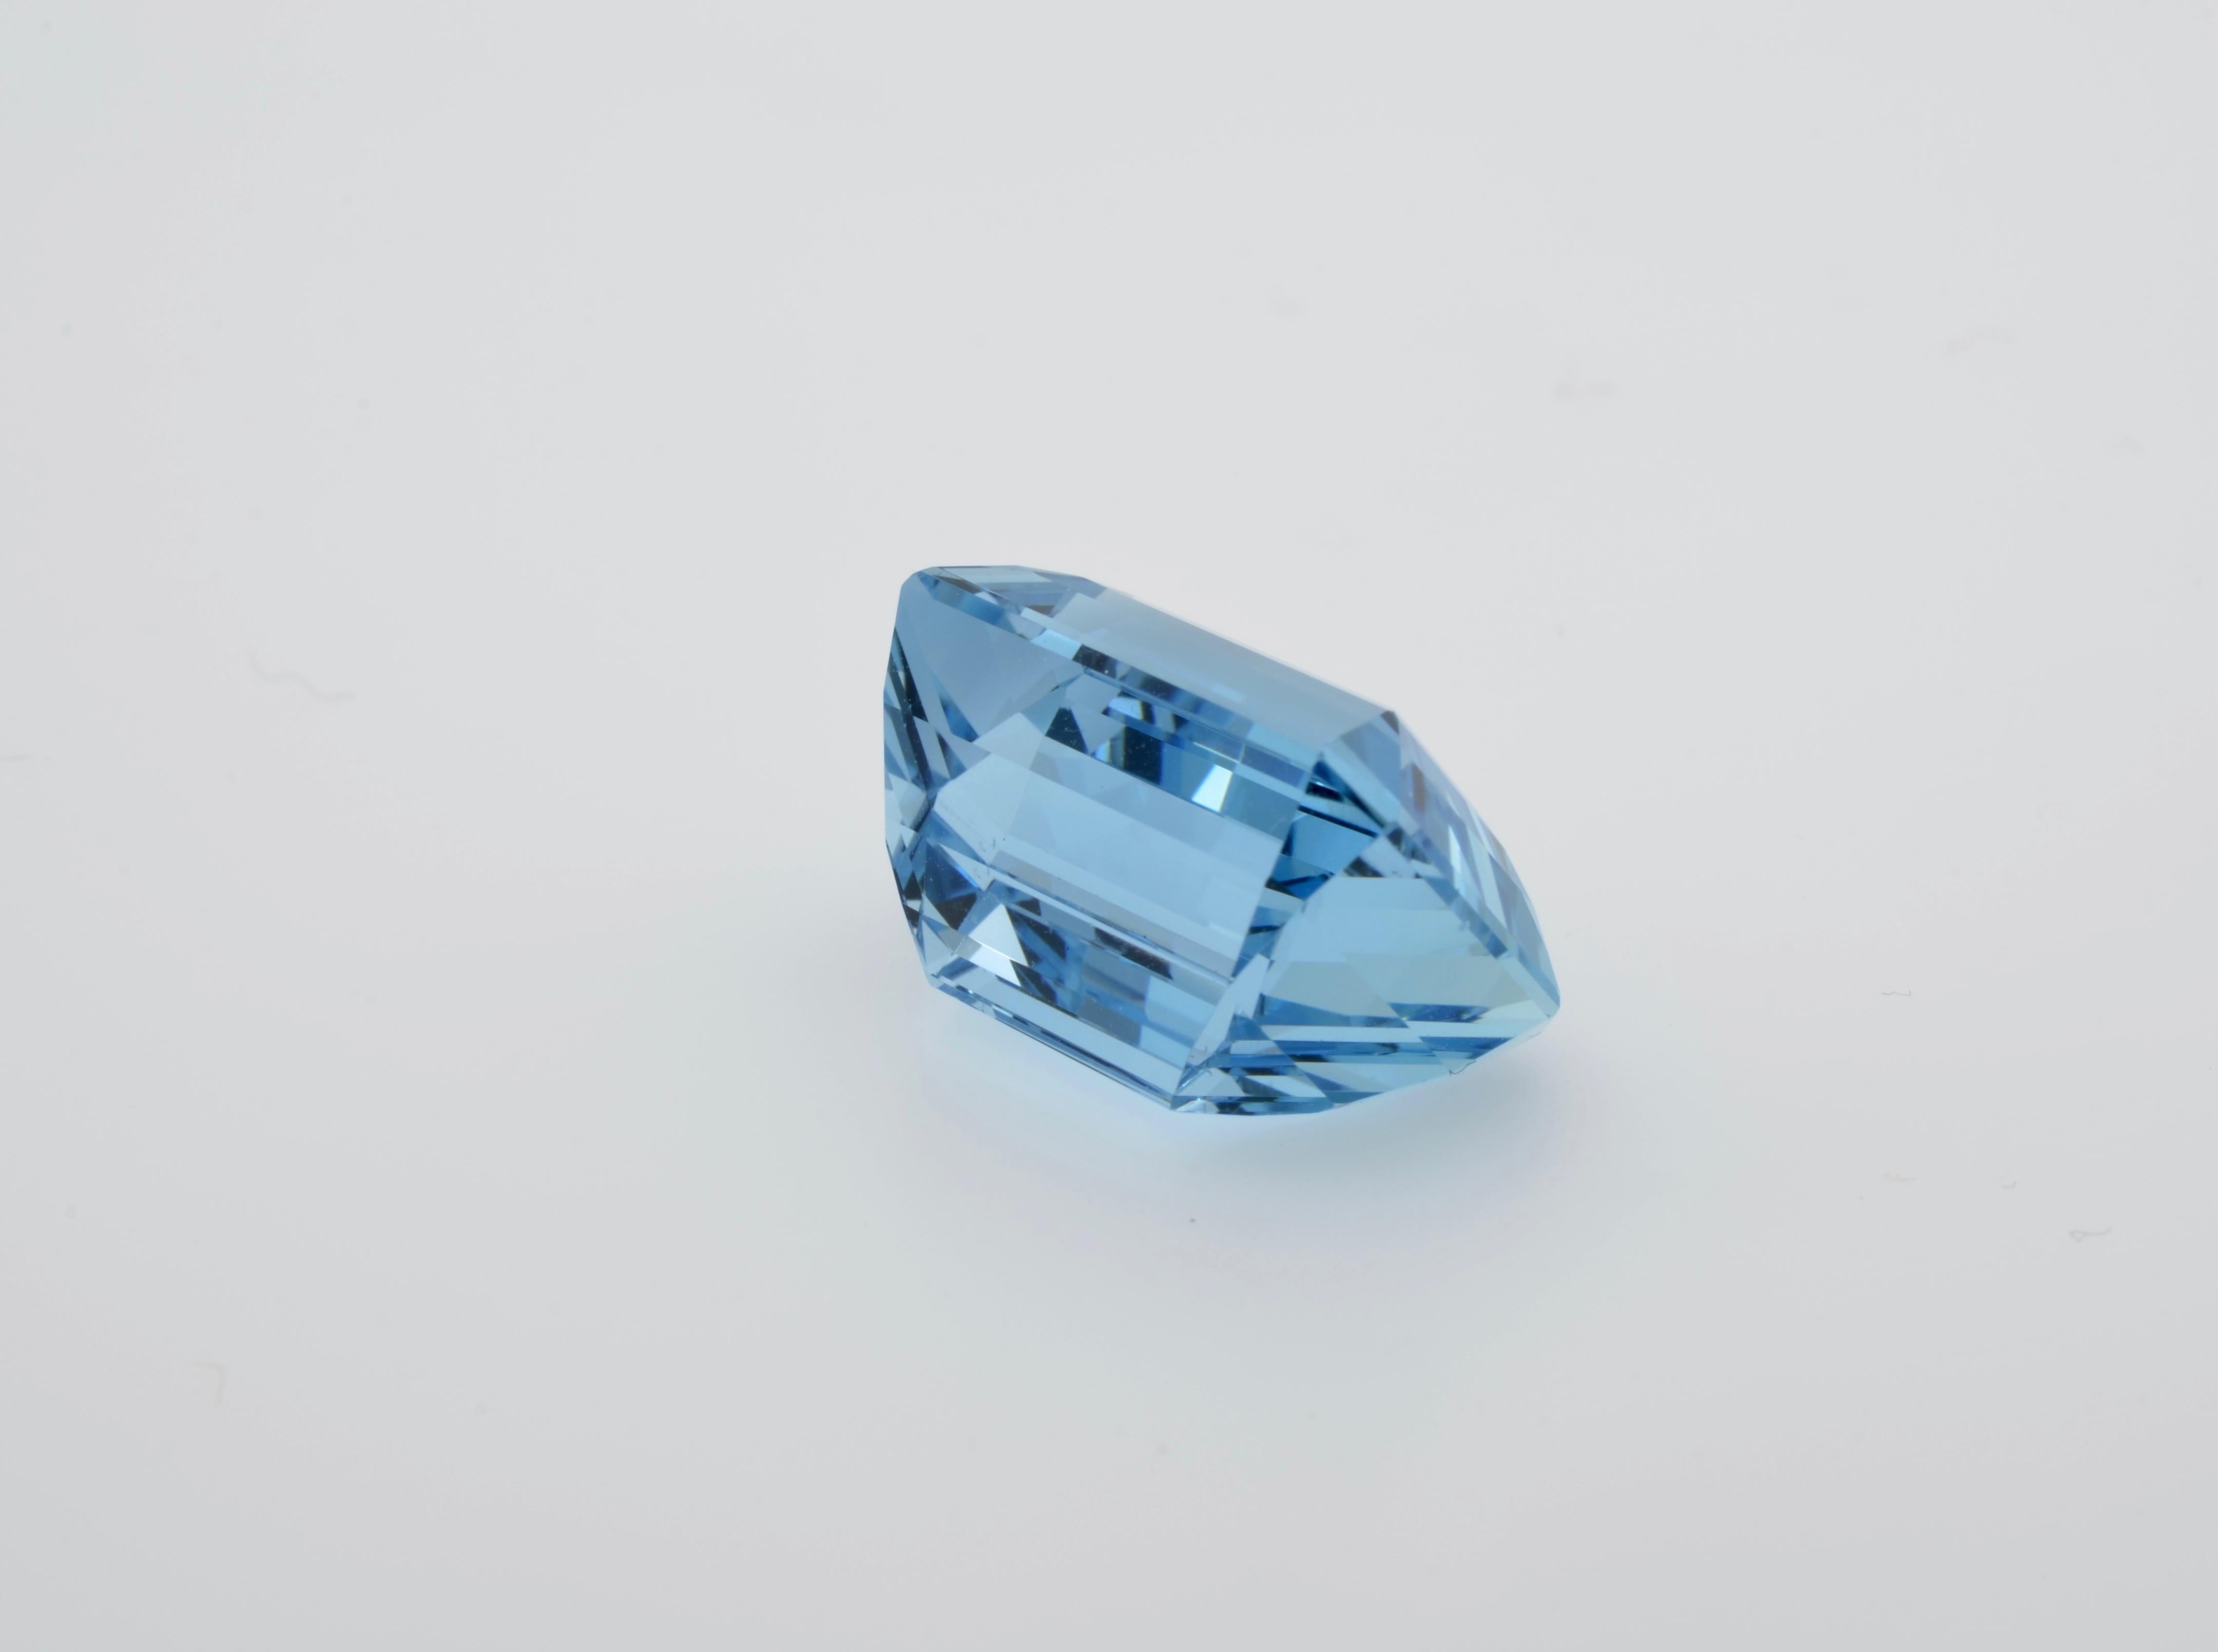 This GIA Certified 19.18 carats Aquamarine is a natural deep blue, and is cut unlike other crystals of this variety.  It is completely clear and can be mounted as a single stone in a ring as well as a pendant.  Most likely it was mined at Minas